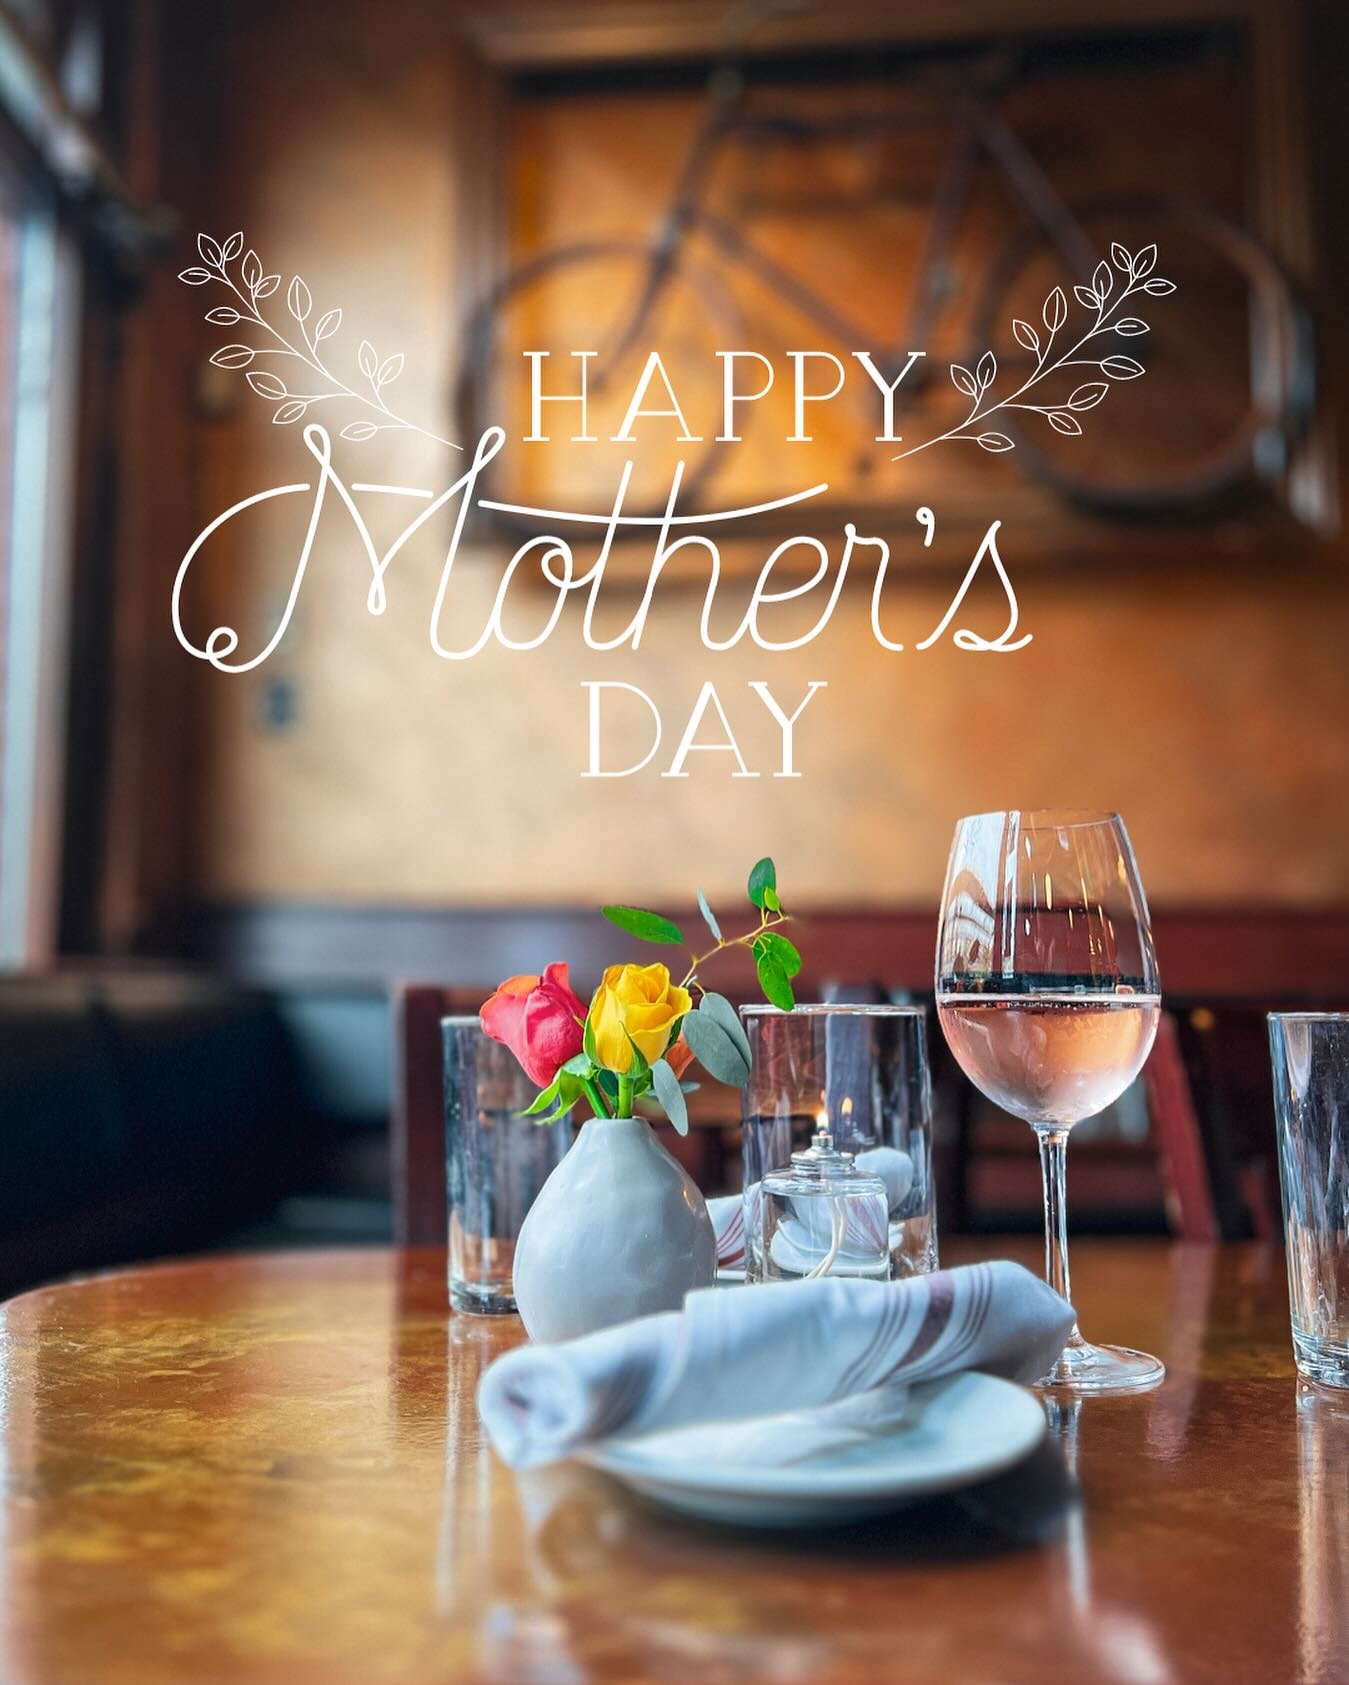 🌸 Happy Mother&rsquo;s Day from all our staff. 🌸We wish you an exciting Mother&rsquo;s Day celebration.
-
-
-
#washingtonsquaretavern #mothersday #brooklineeats #bostontavern